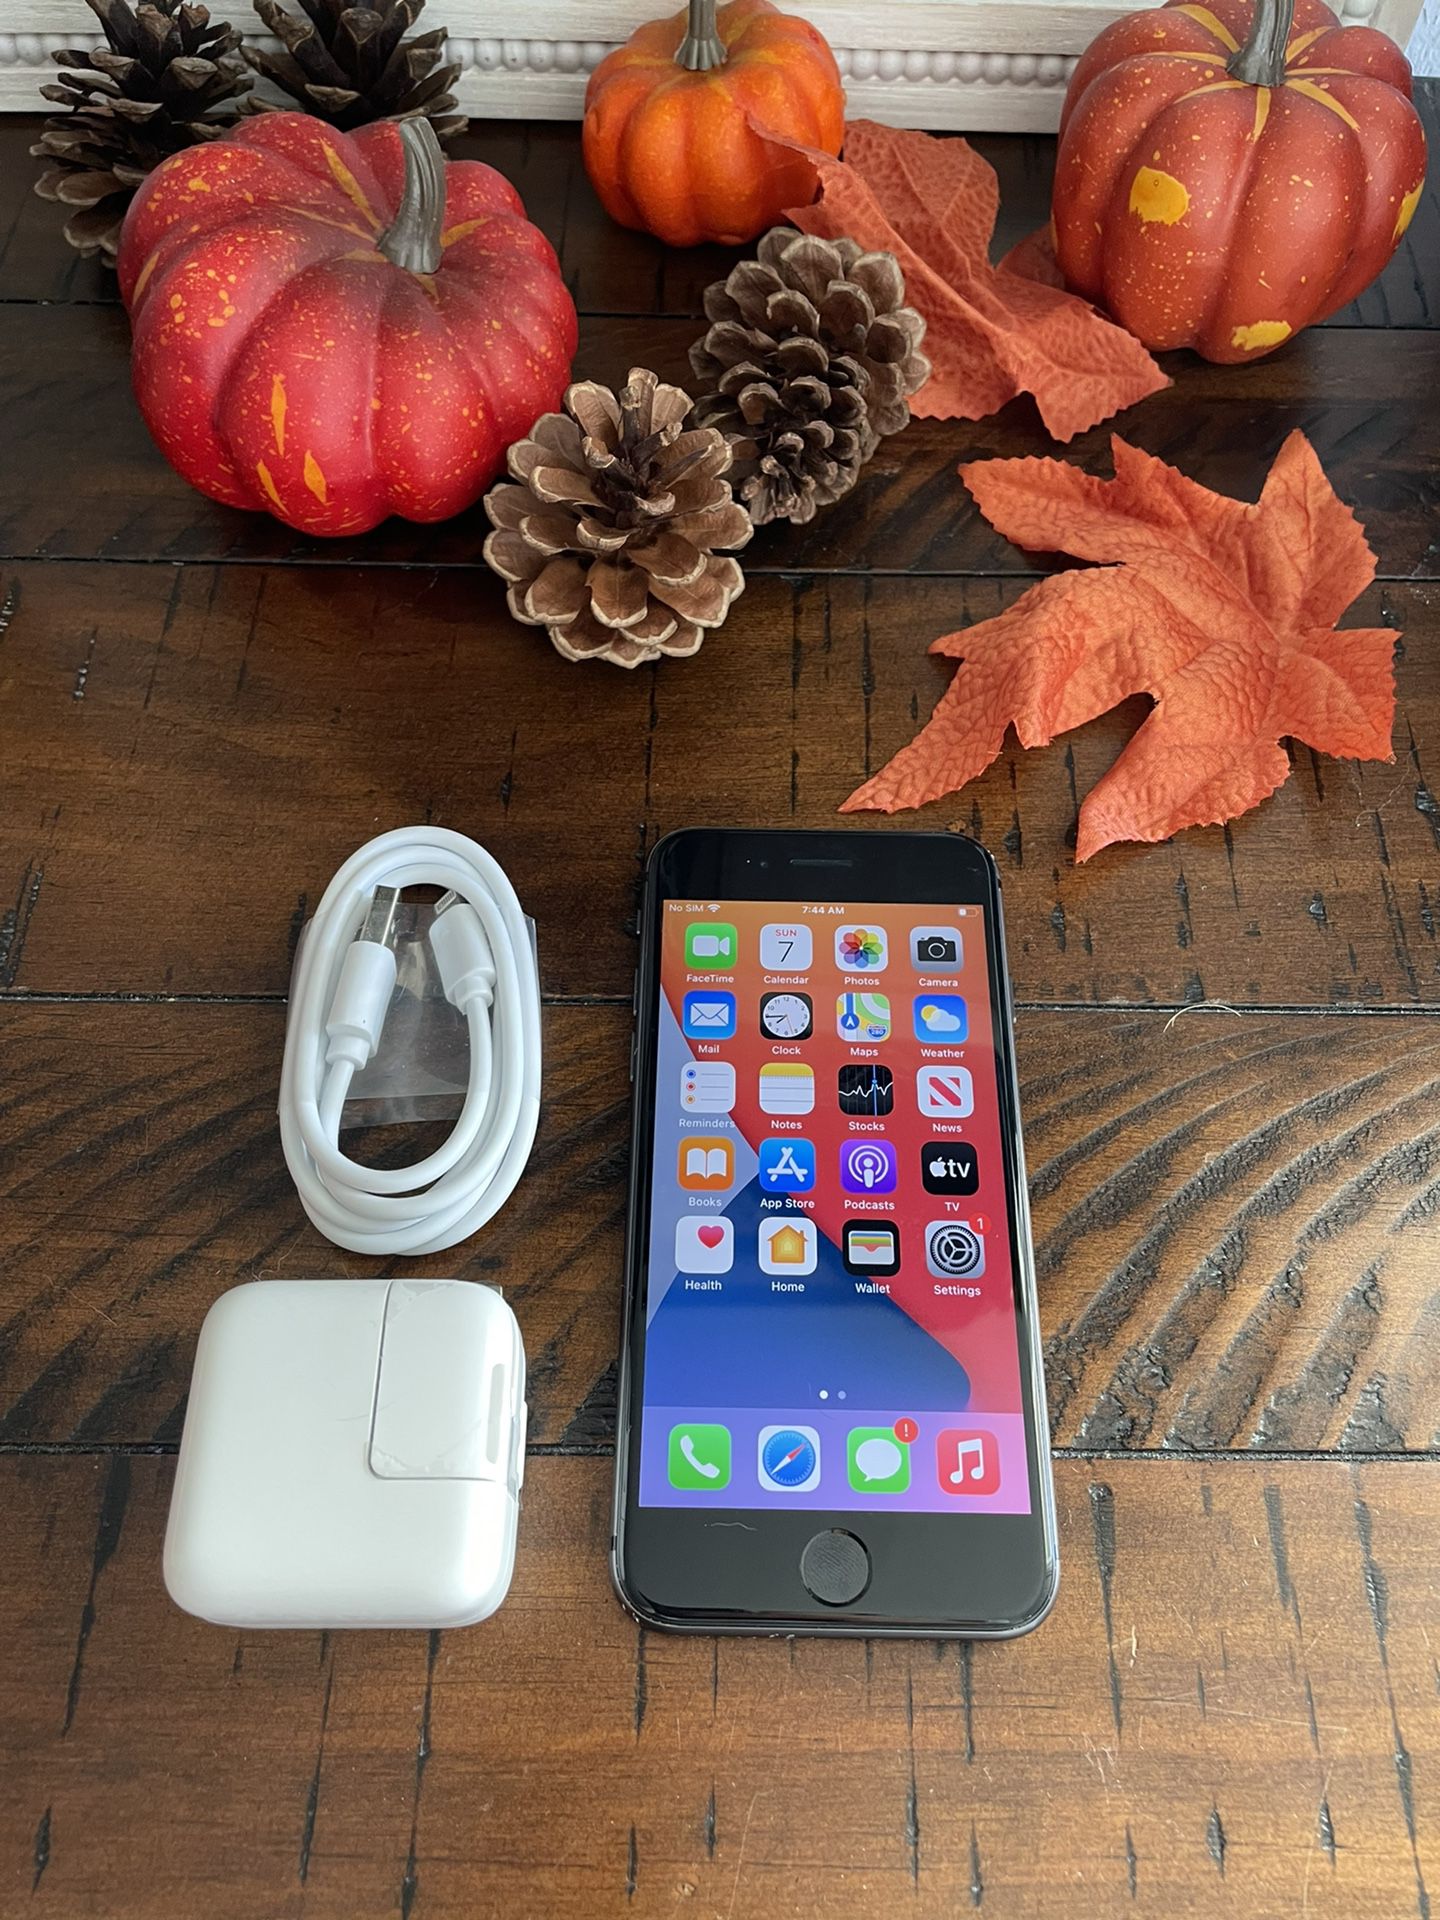 Iphone 8 UNLOCKED 64 Gb Great Condition